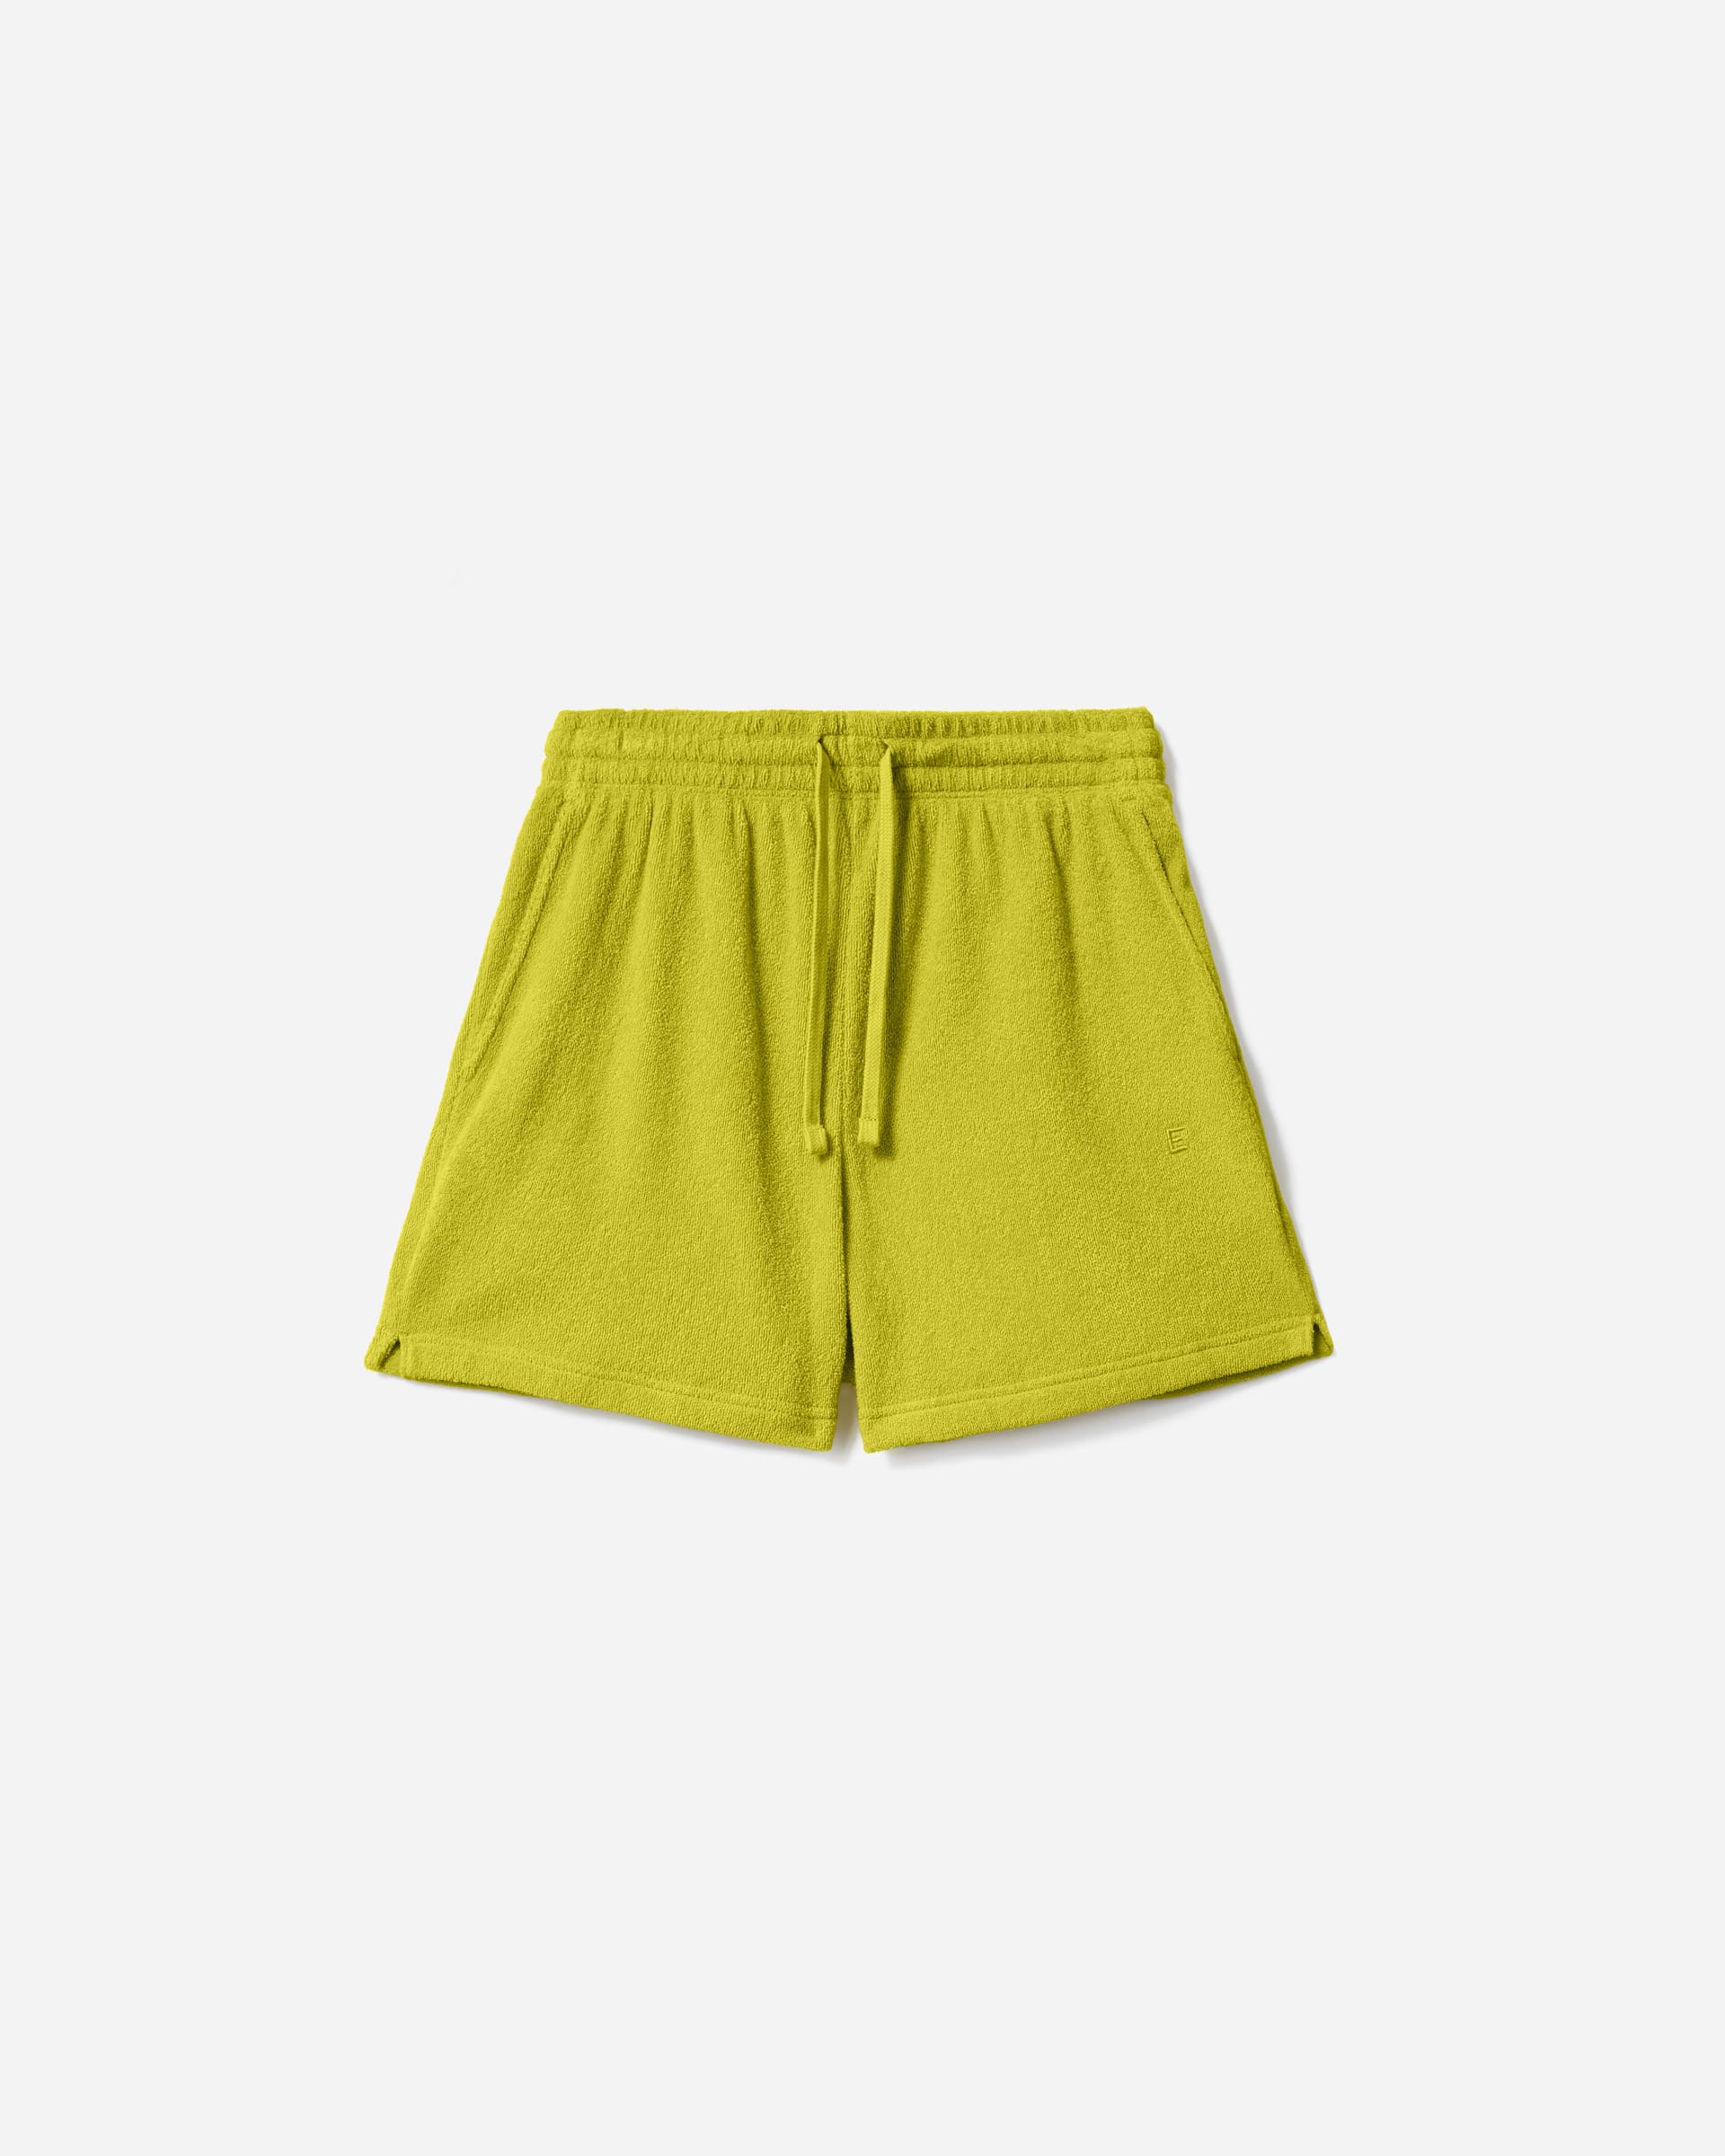 The Terry Cloth Short Key Lime – Everlane